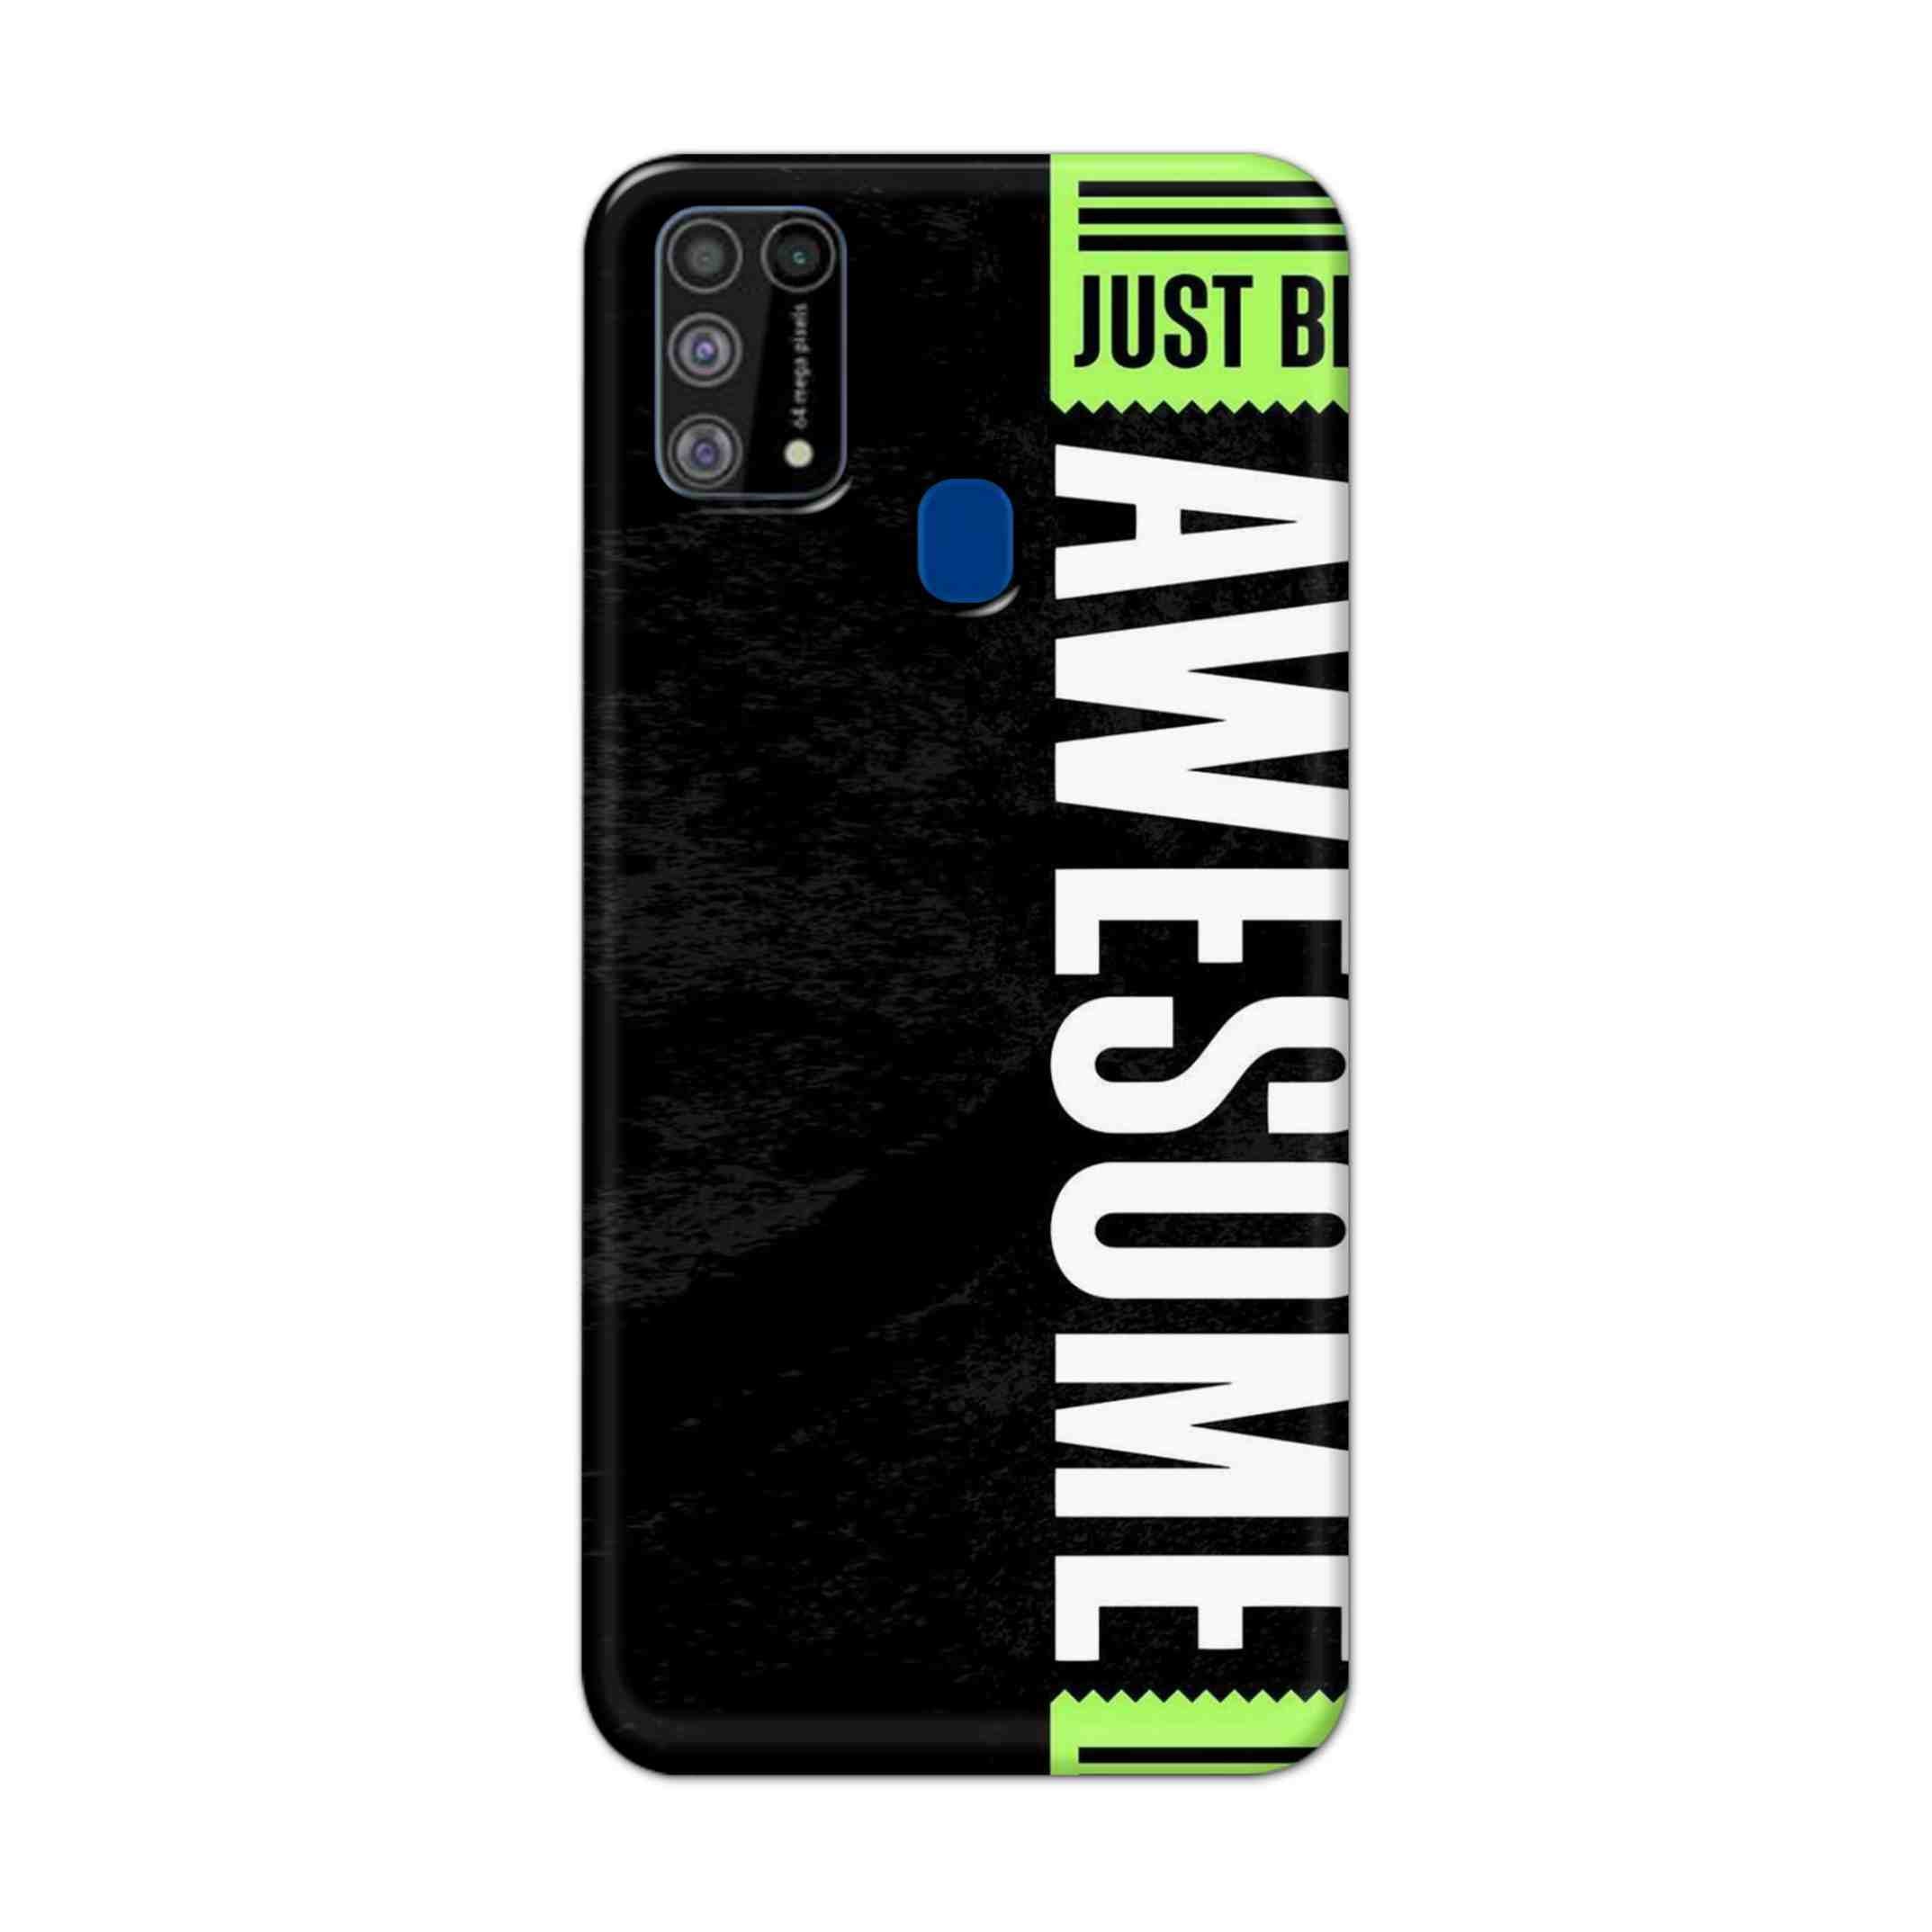 Buy Awesome Street Hard Back Mobile Phone Case Cover For Samsung Galaxy M31 Online